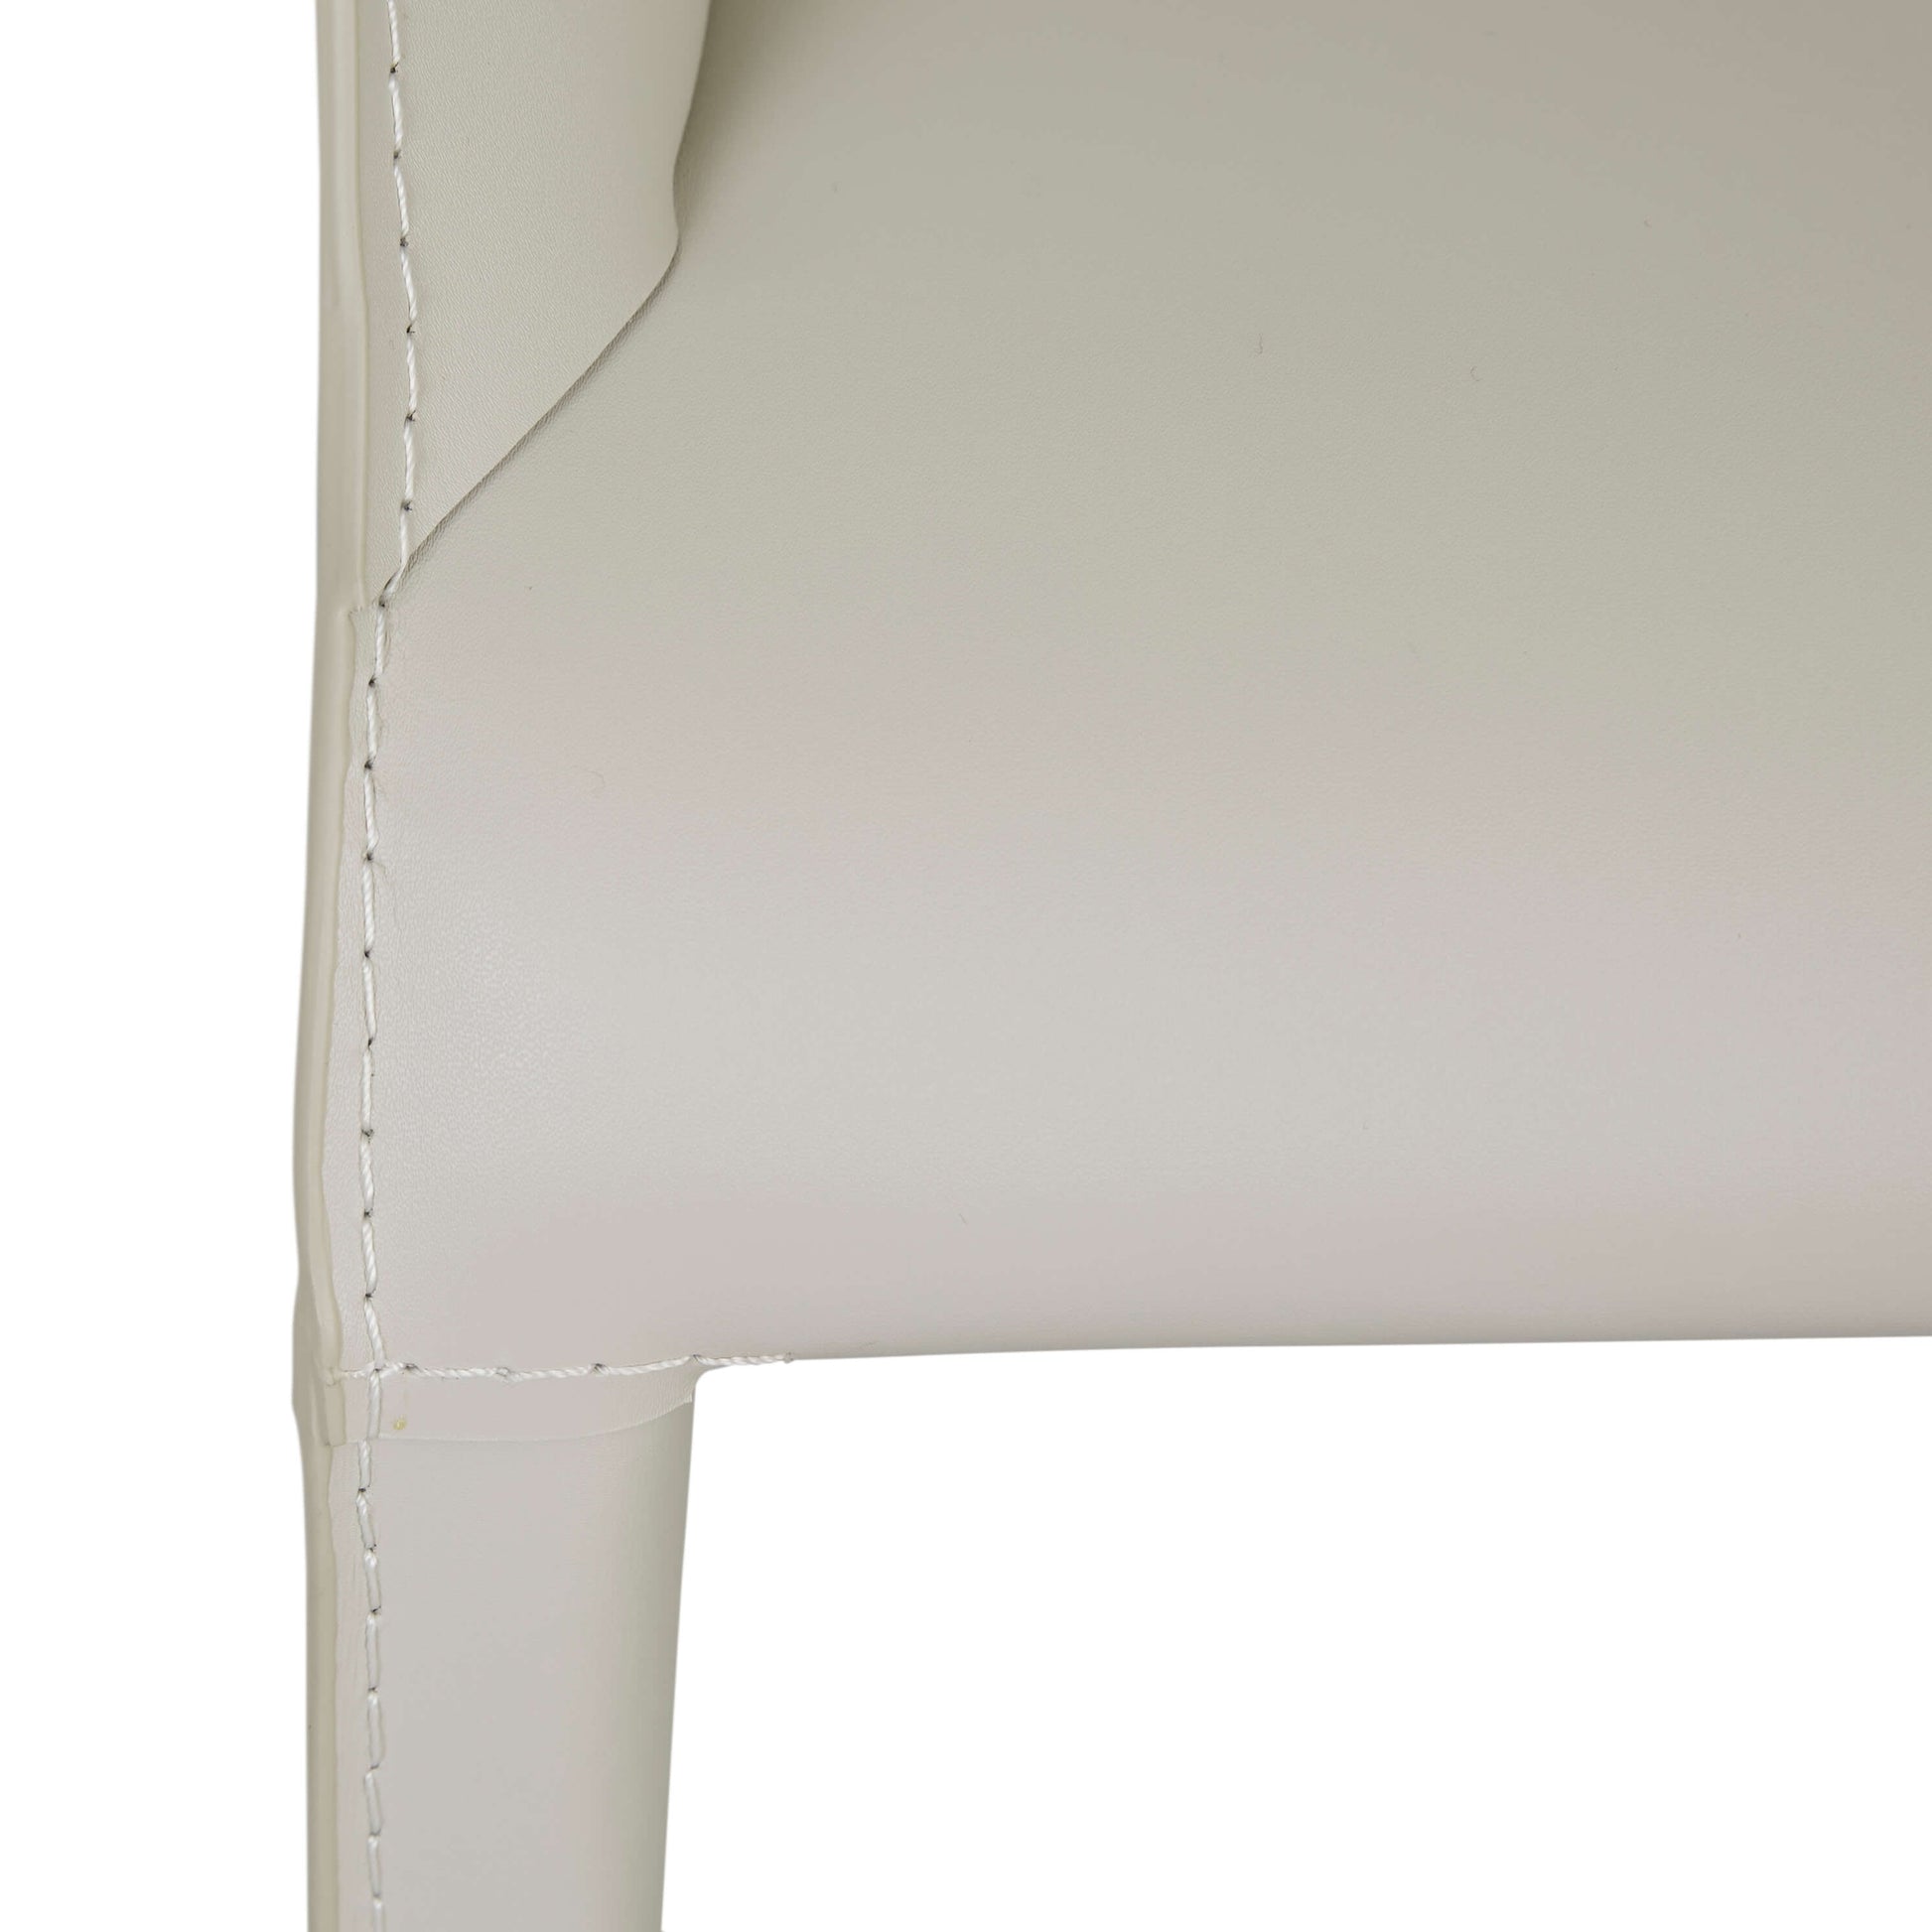 Percy | Contemporary Recycled Leather Dining Chair With Arms